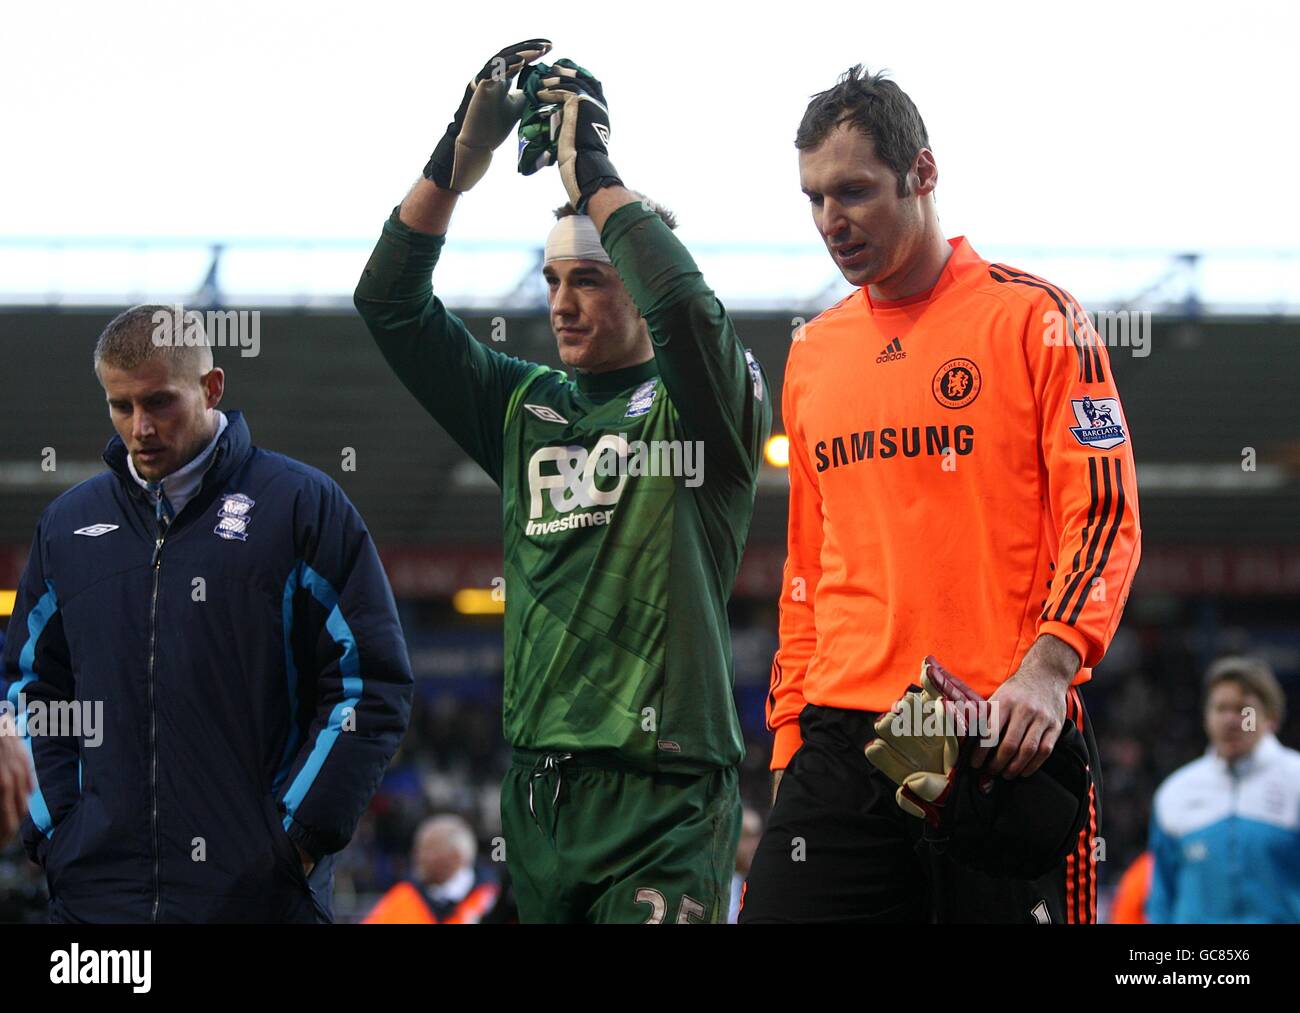 Soccer - Barclays Premier League - Birmingham City v Chelsea - St Andrews Stadium. Chelsea goalkeeper Petr Cech and Birmingham City goalkeeper Joe Hart leave the pitch after the game Stock Photo